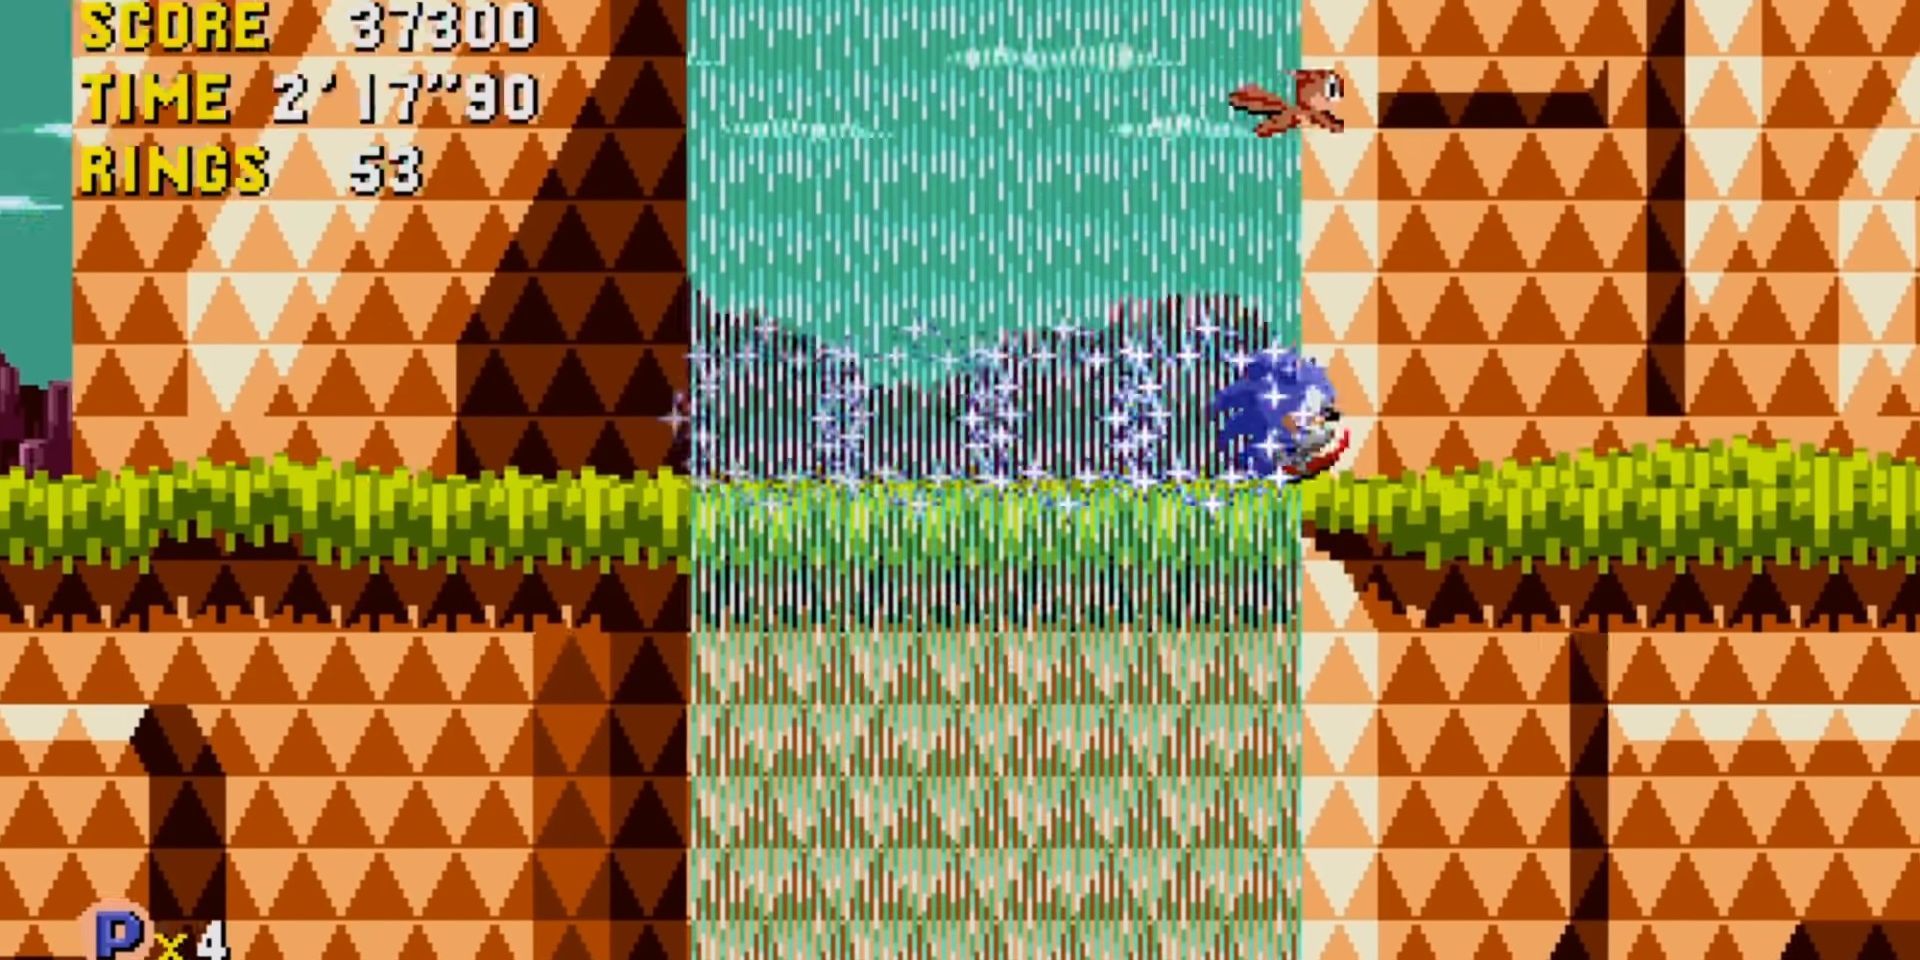 A screenshot from the Sonic CD Classic video game